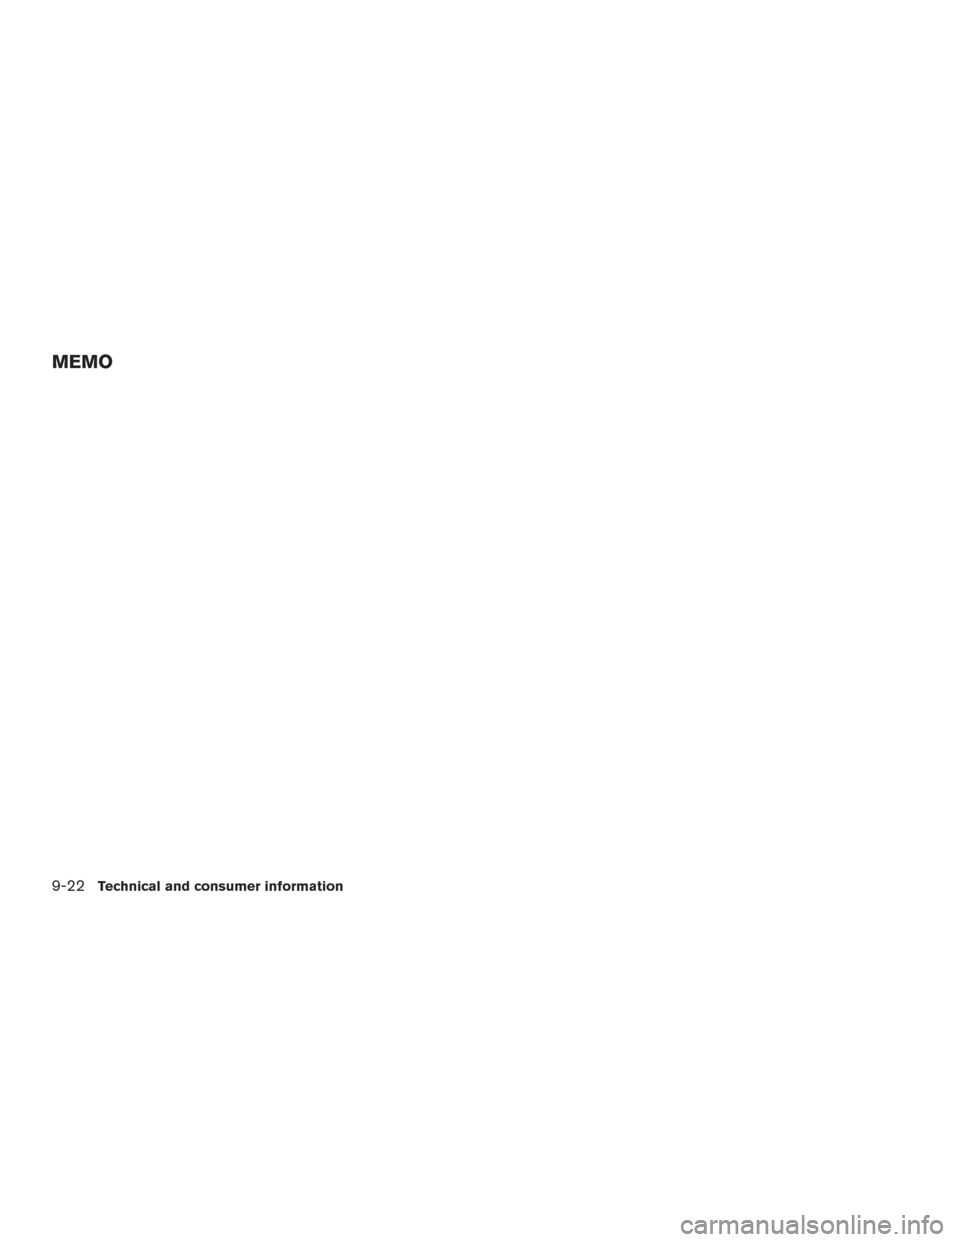 NISSAN ALTIMA 2016 L33 / 5.G Owners Manual MEMO
9-22Technical and consumer information 